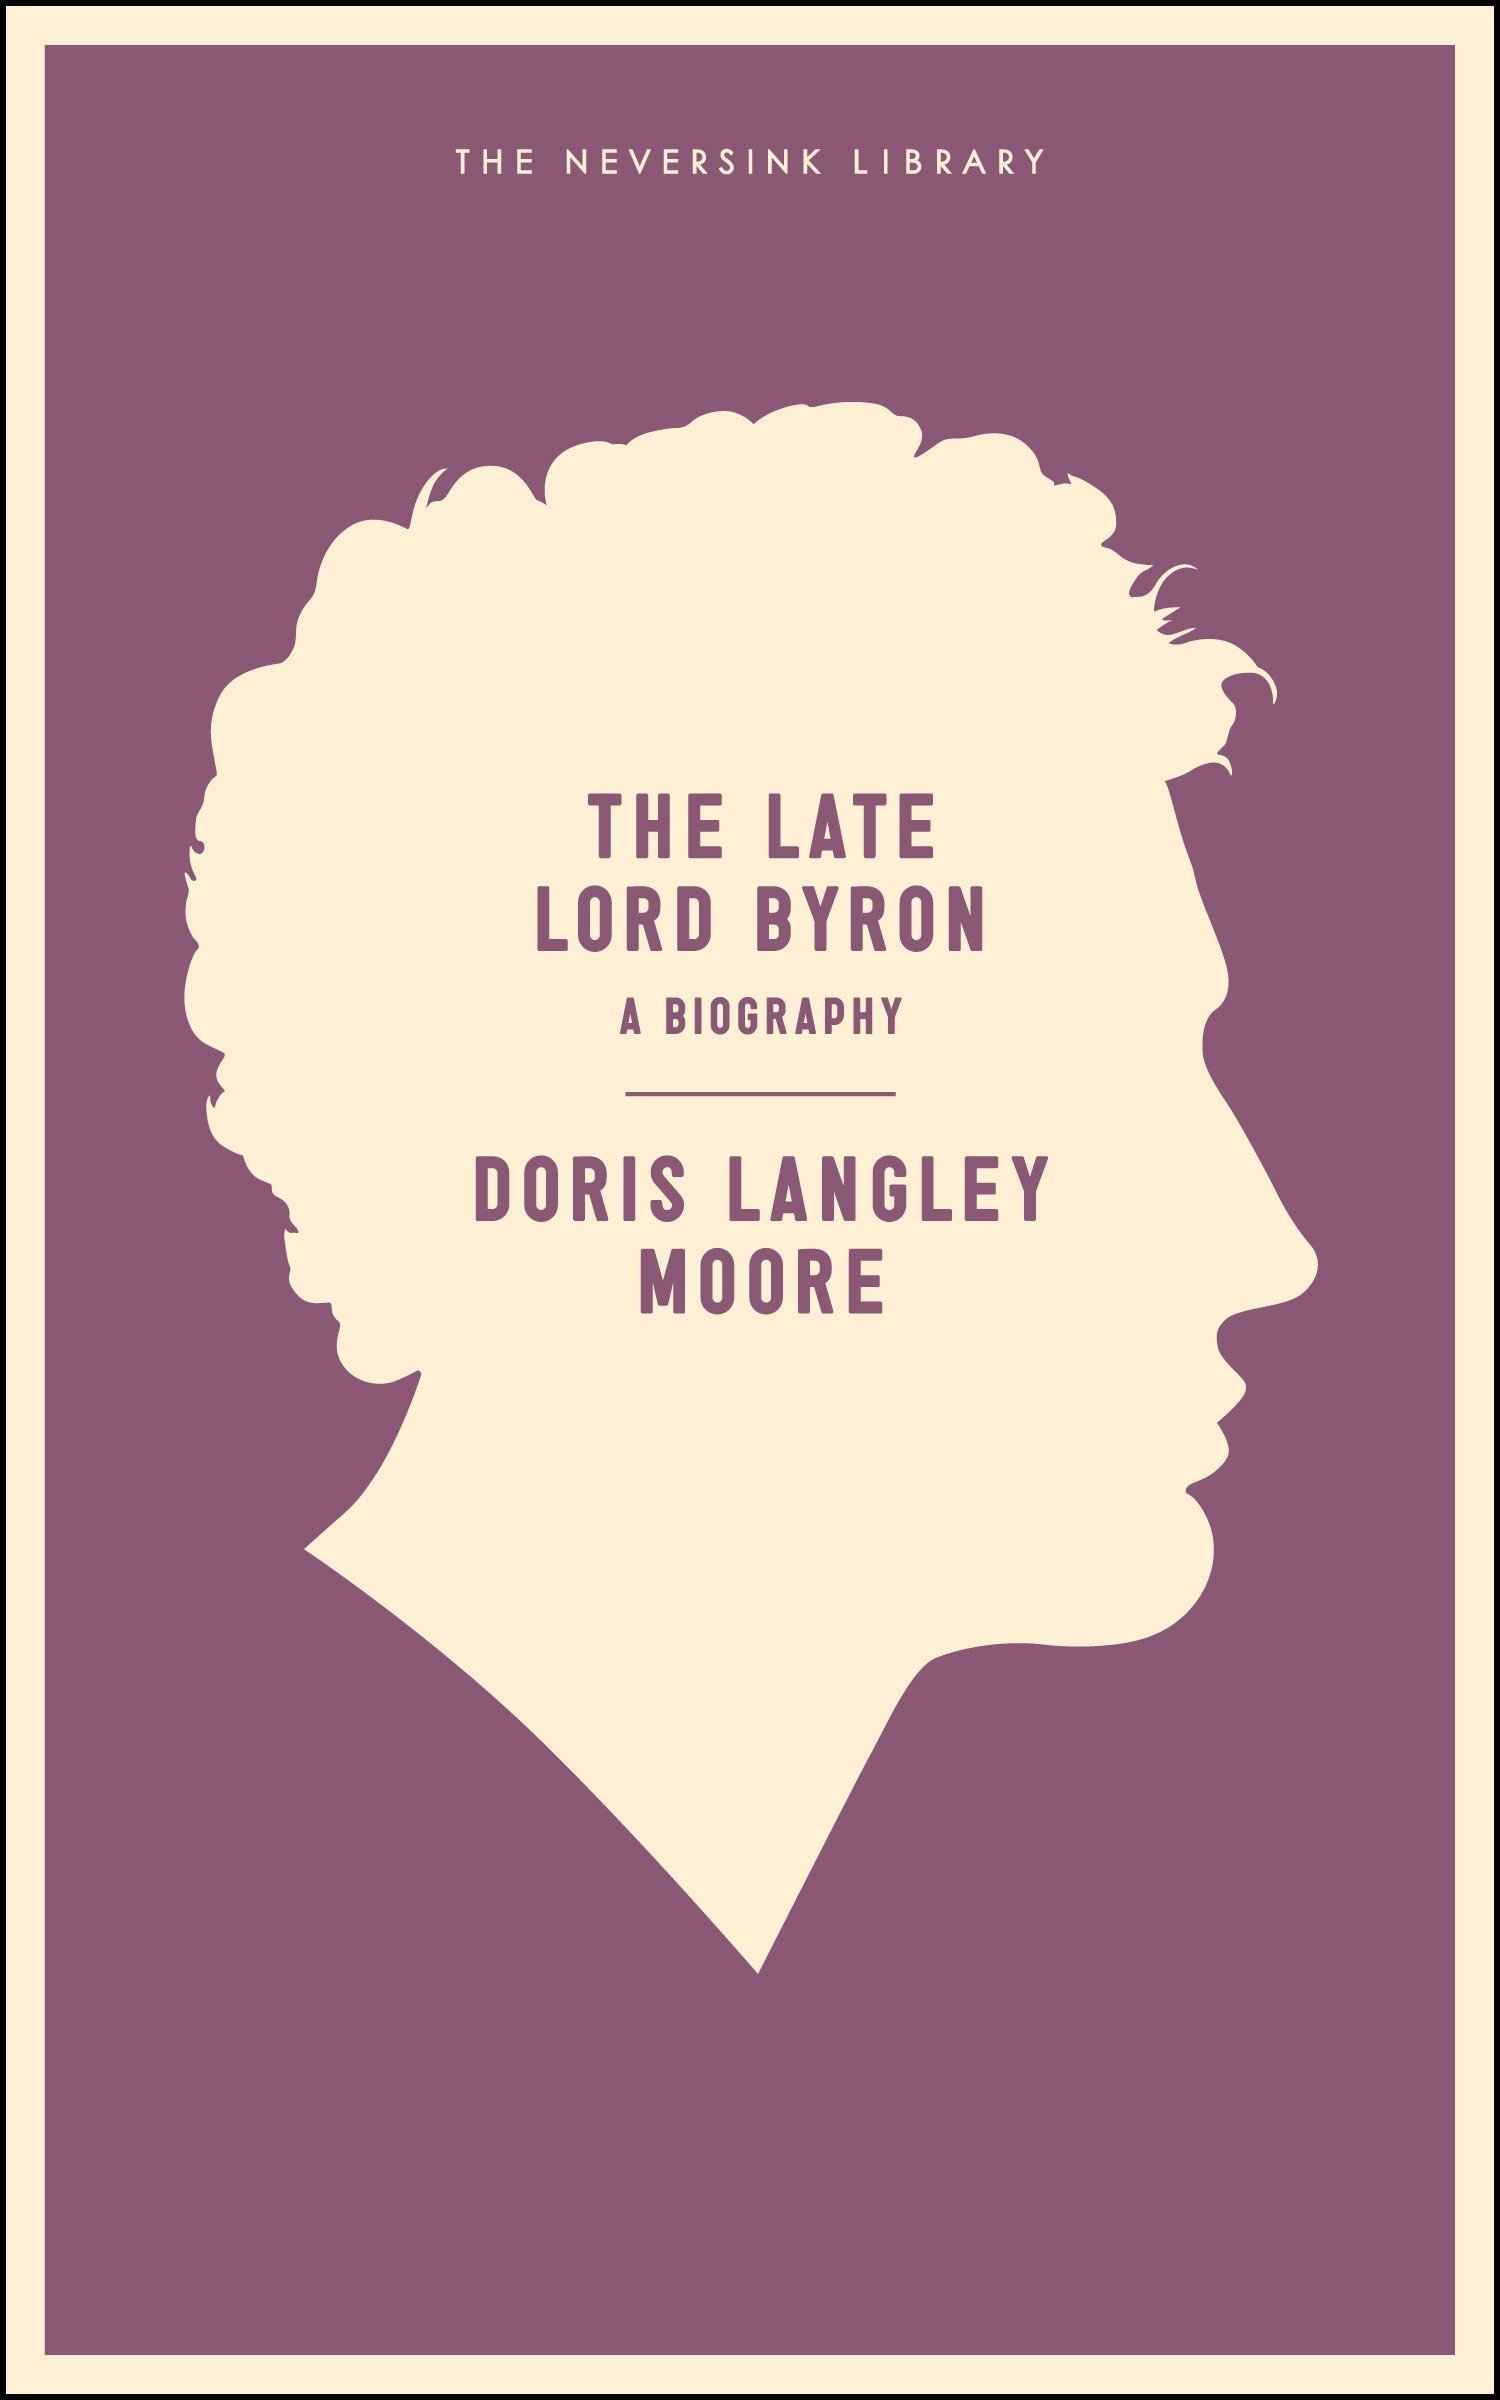 The late Lord Byron